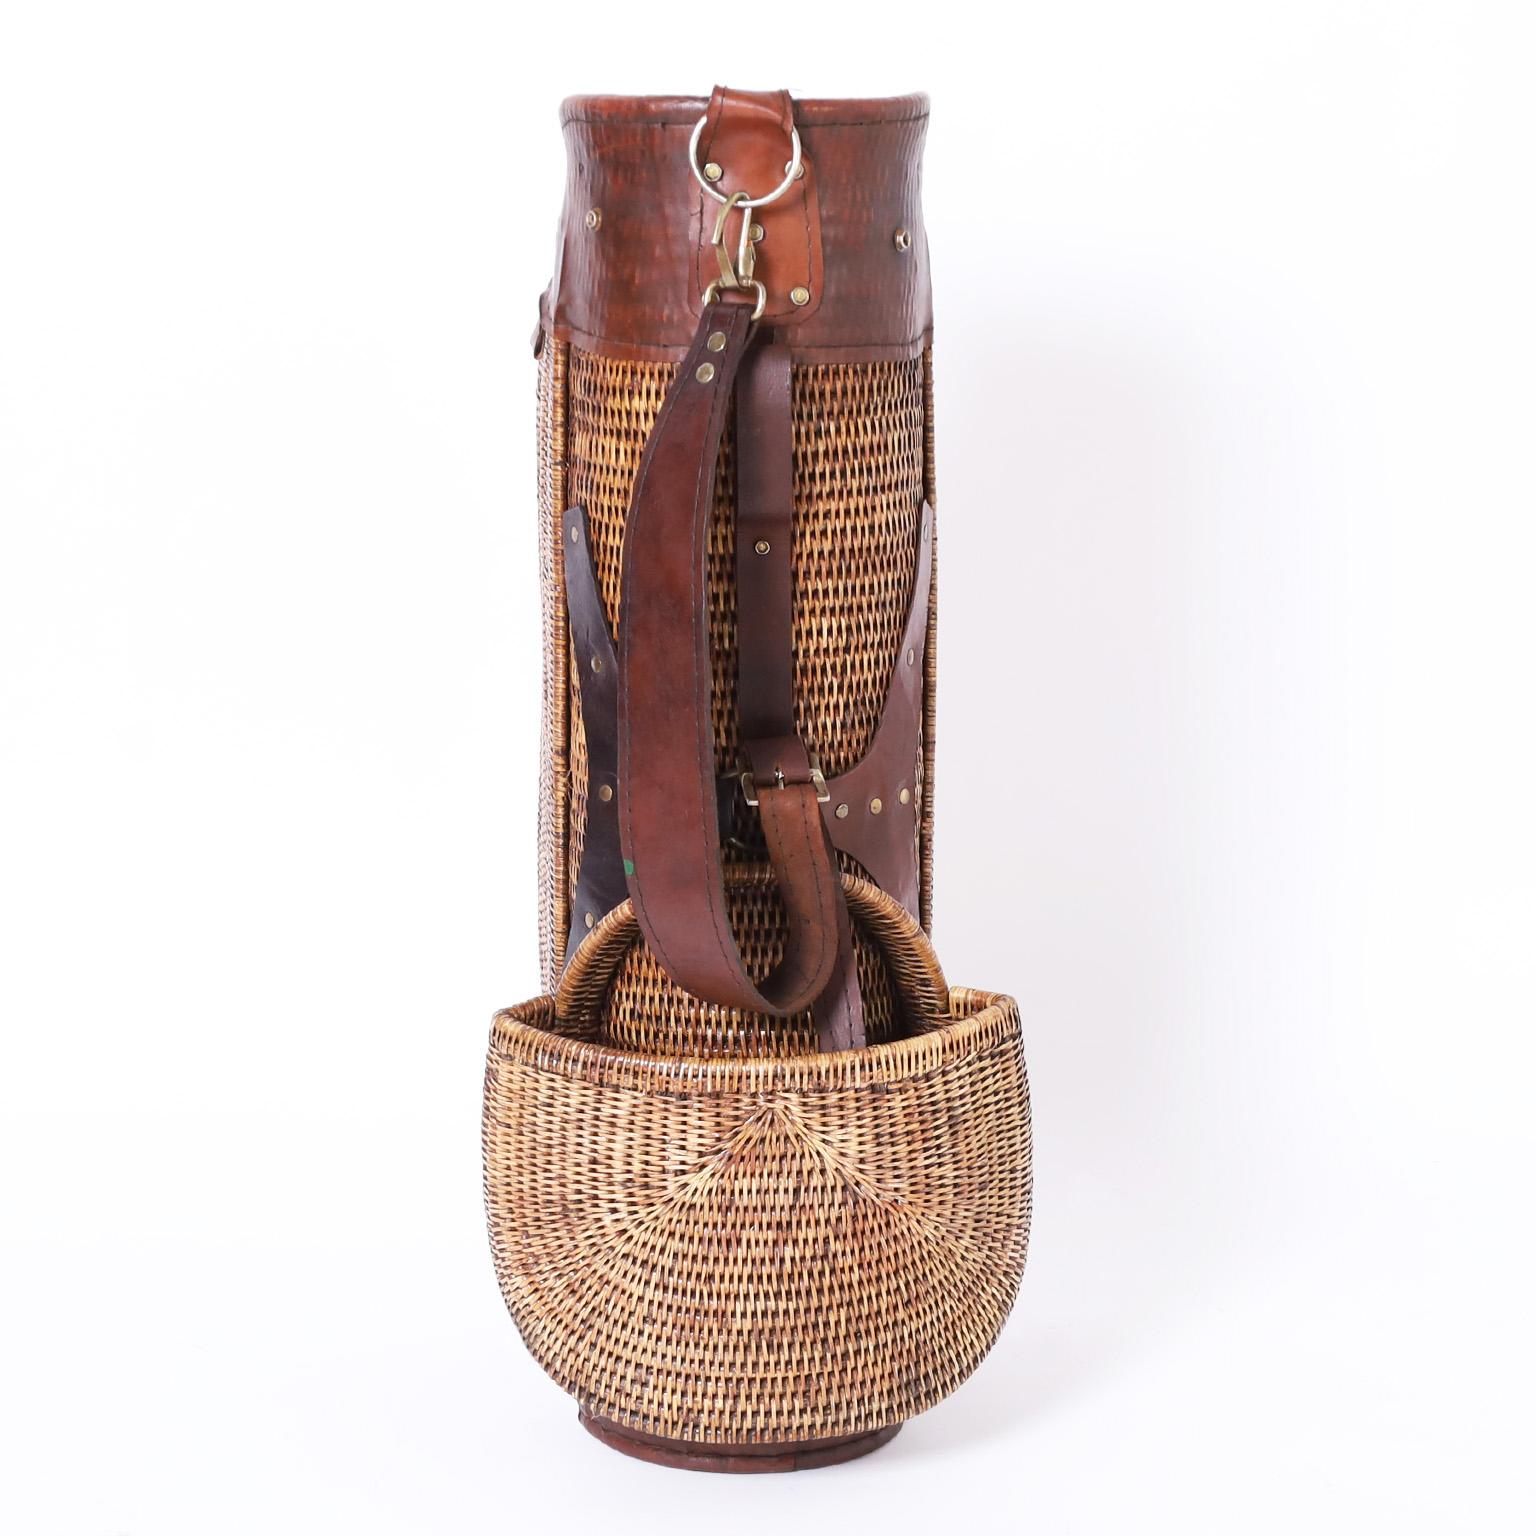 Transporting British Colonial style golf bag crafted in wicker and leather in a vintage form for golf clubs, balls and tees.